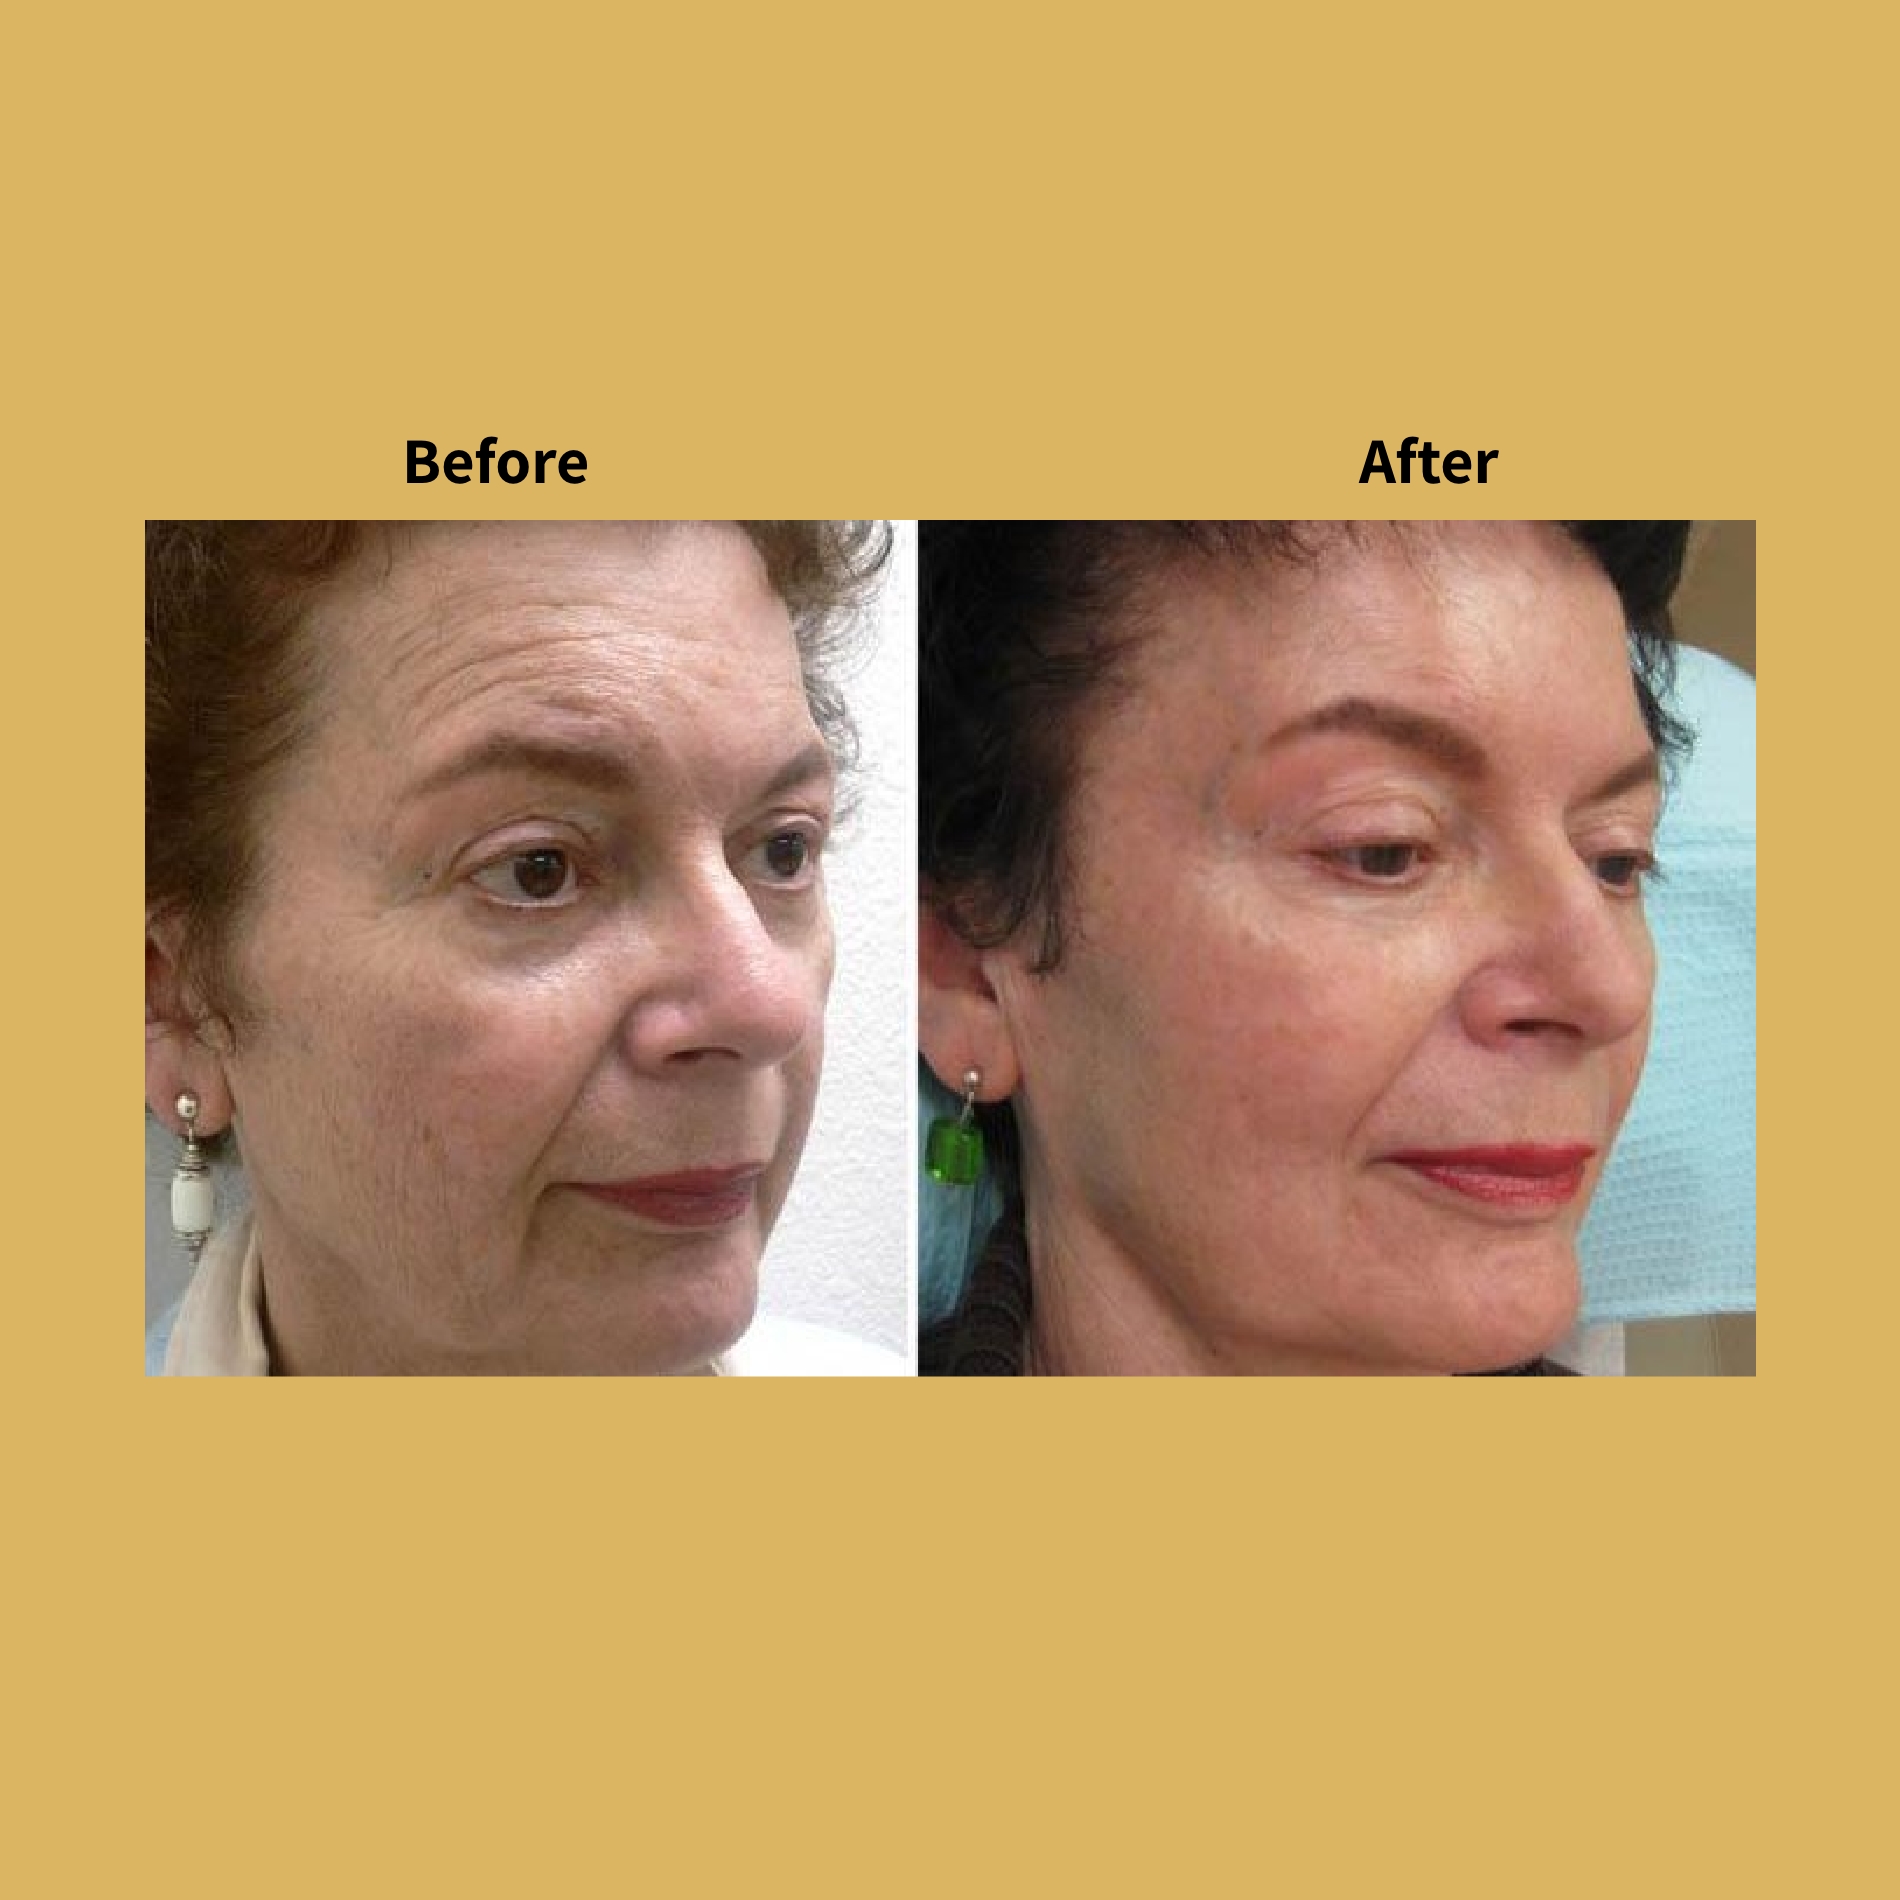 Pixel Perfect Laser Treatment Before and After Photos | Soleil Medical & Beauty Spa in Portland, OR